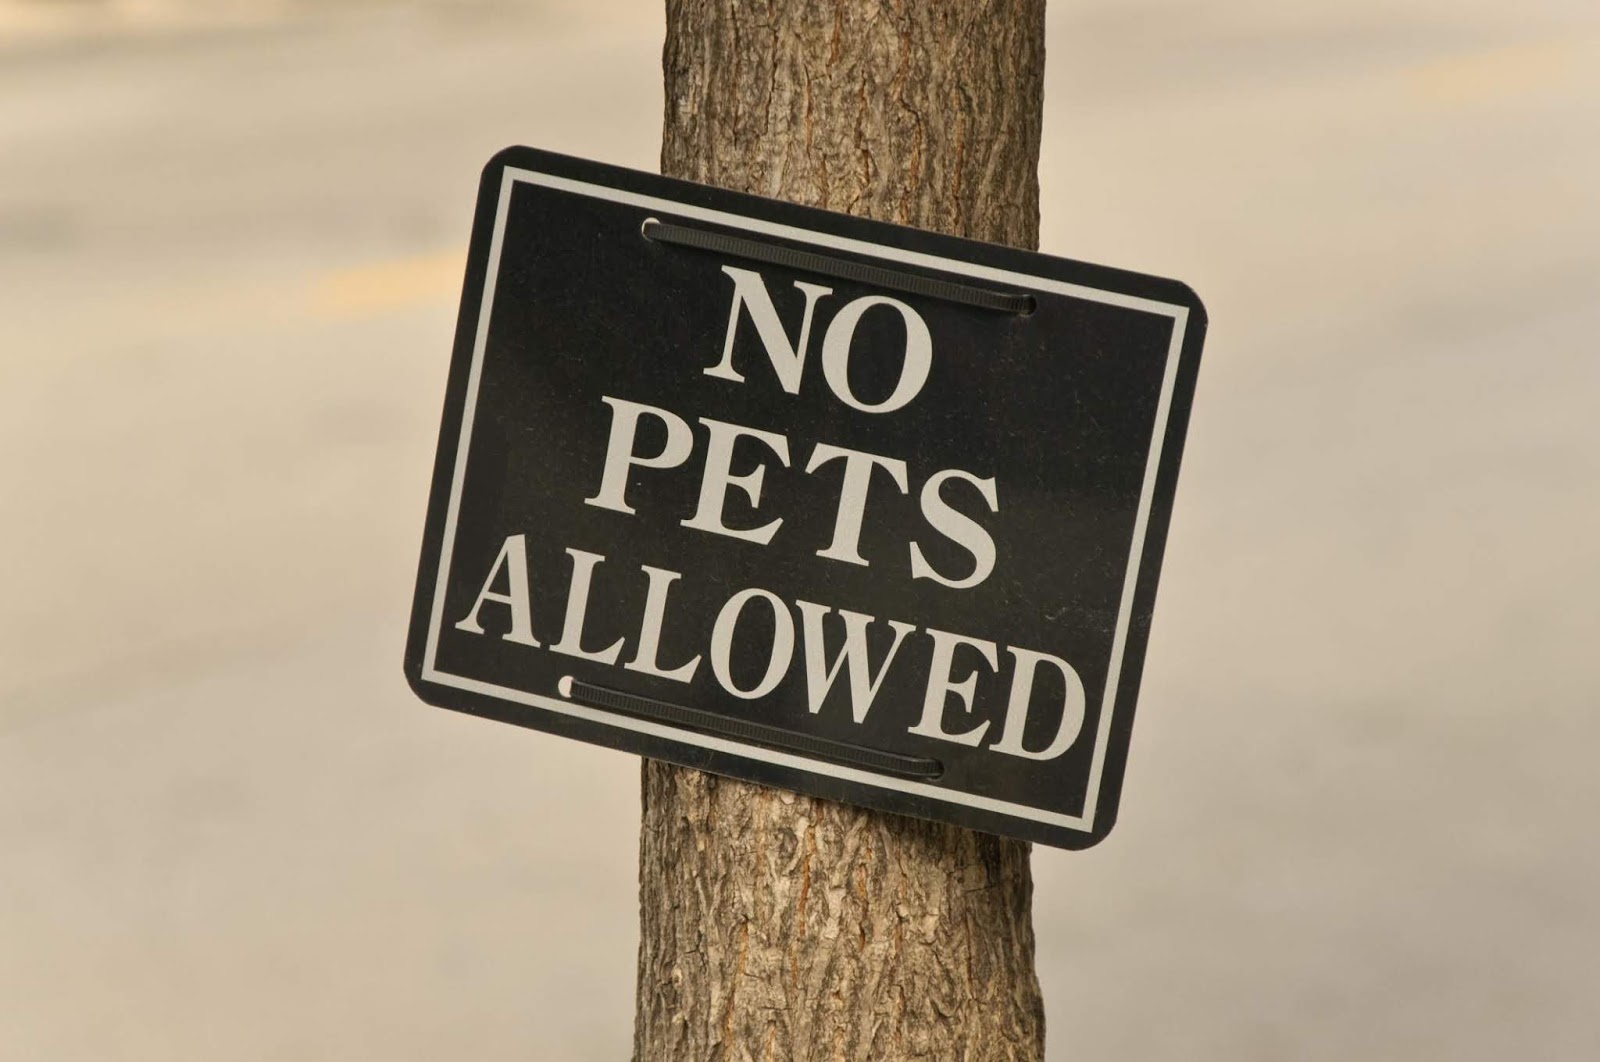 Pets allowed